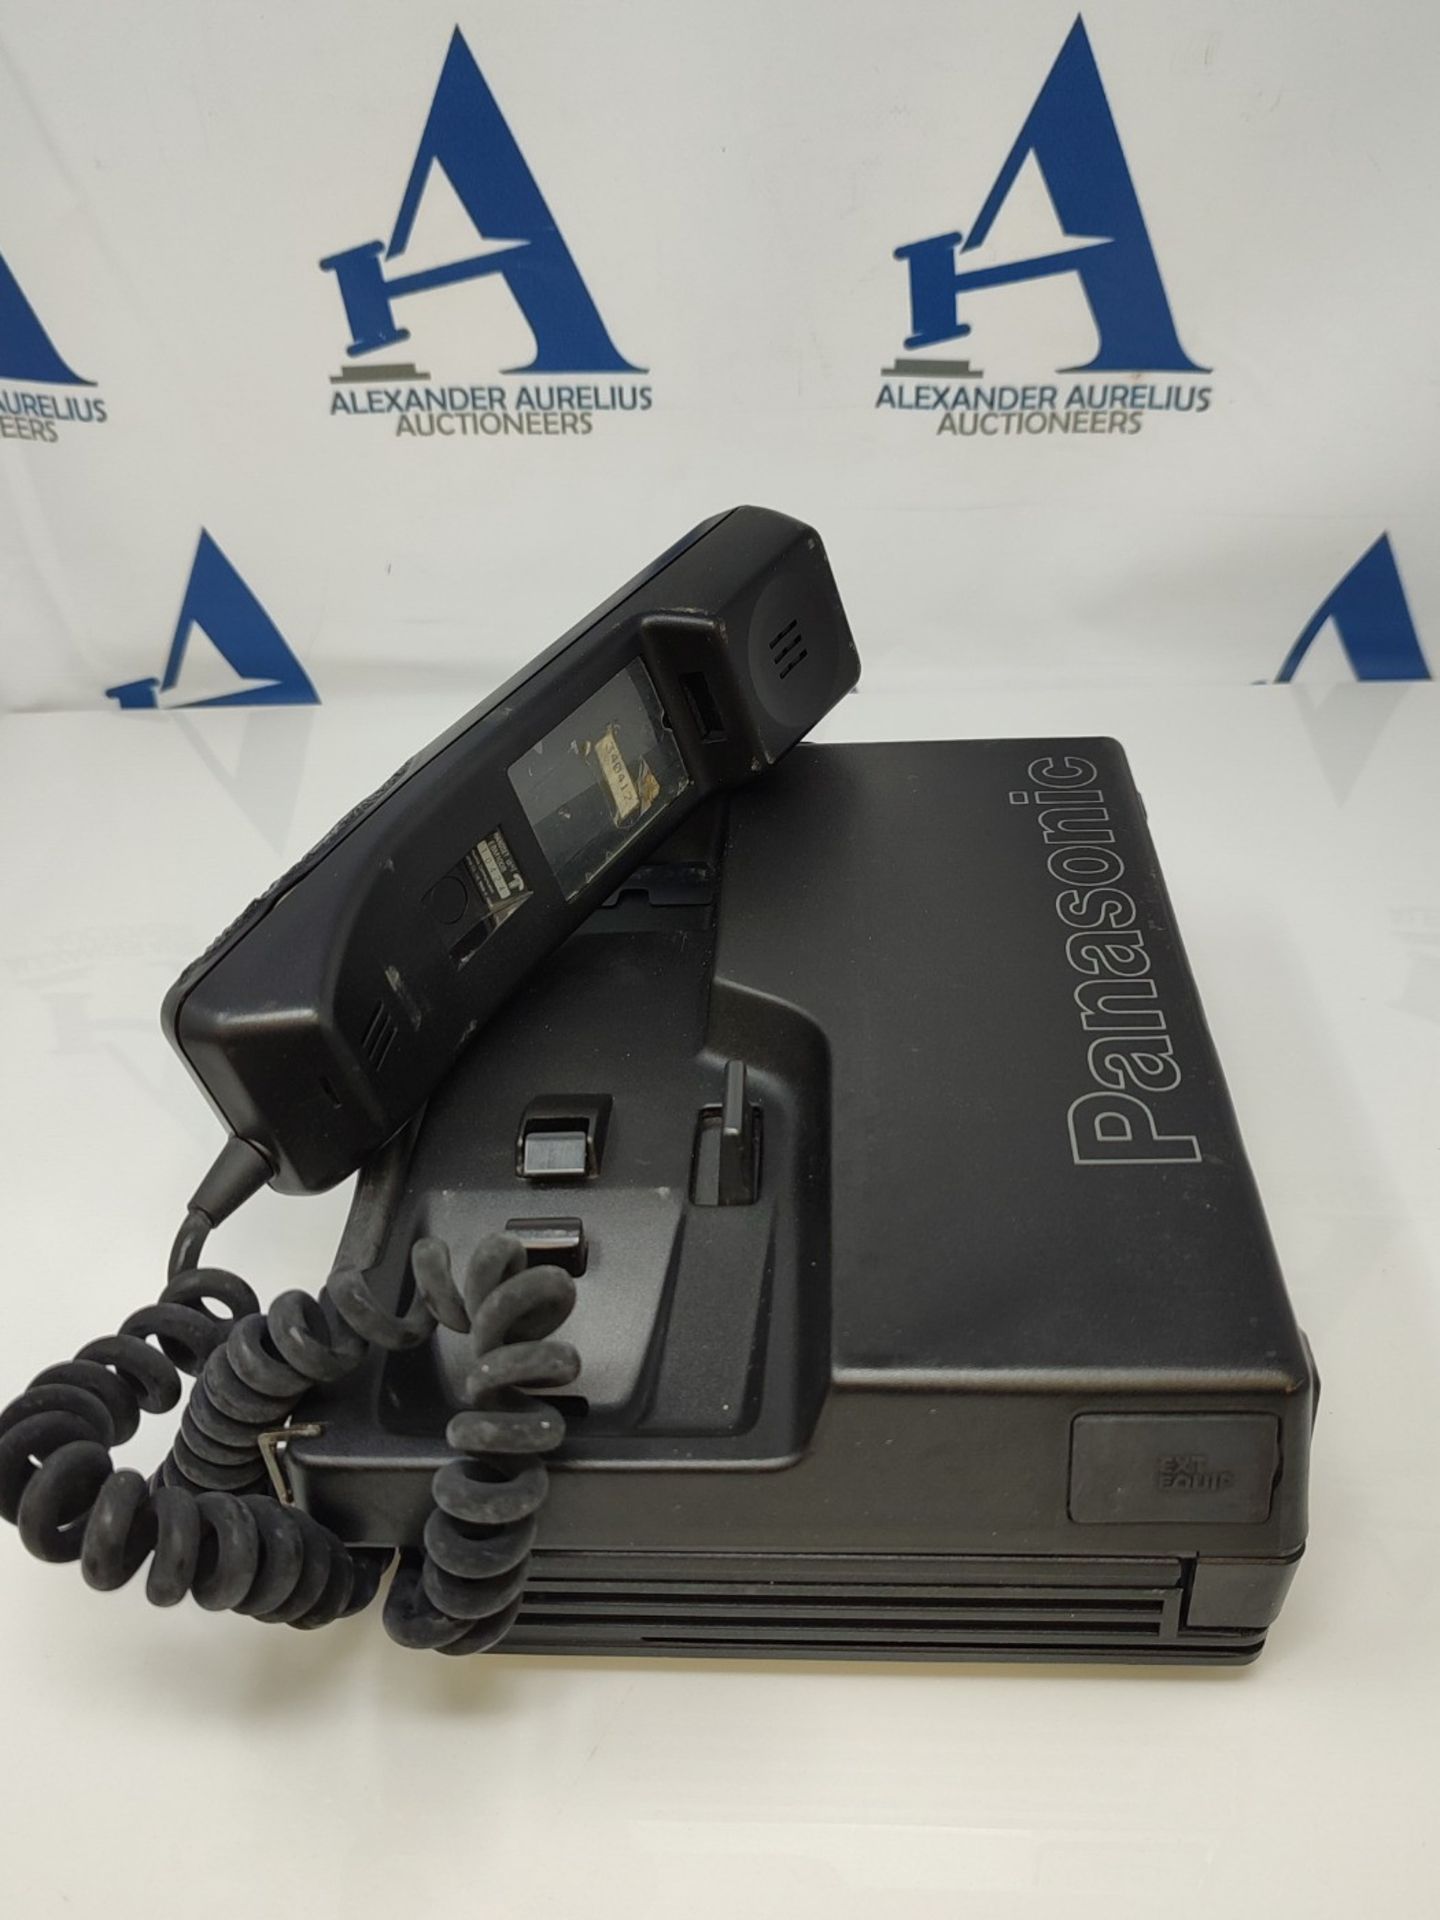 Panasonic Mobile Phone one of the 1st type EF-6151EB - Image 2 of 2